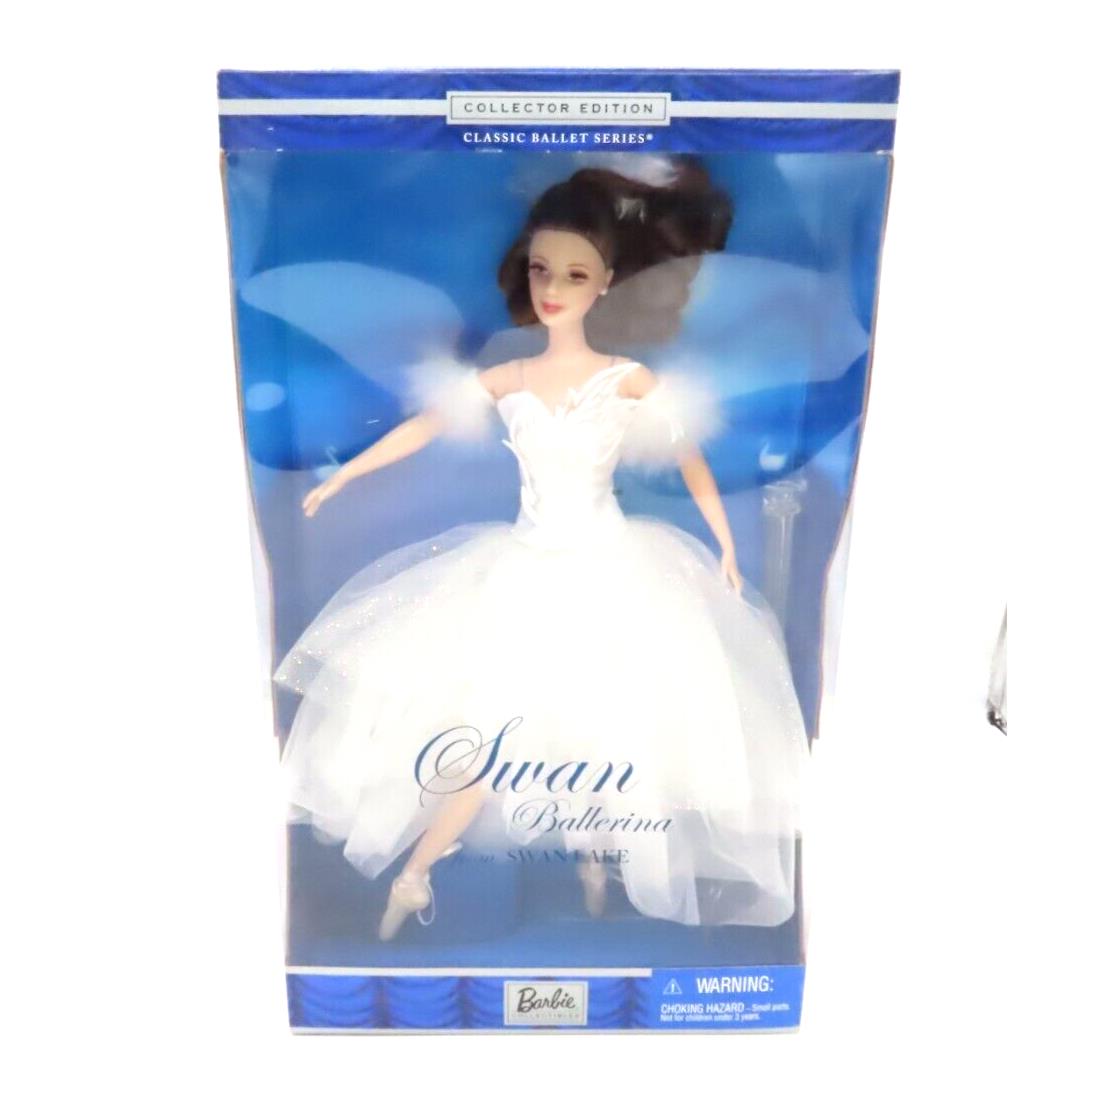 Swan Ballerina From Swan Lake Collector Edition Classic Ballet Series 2001 Matte